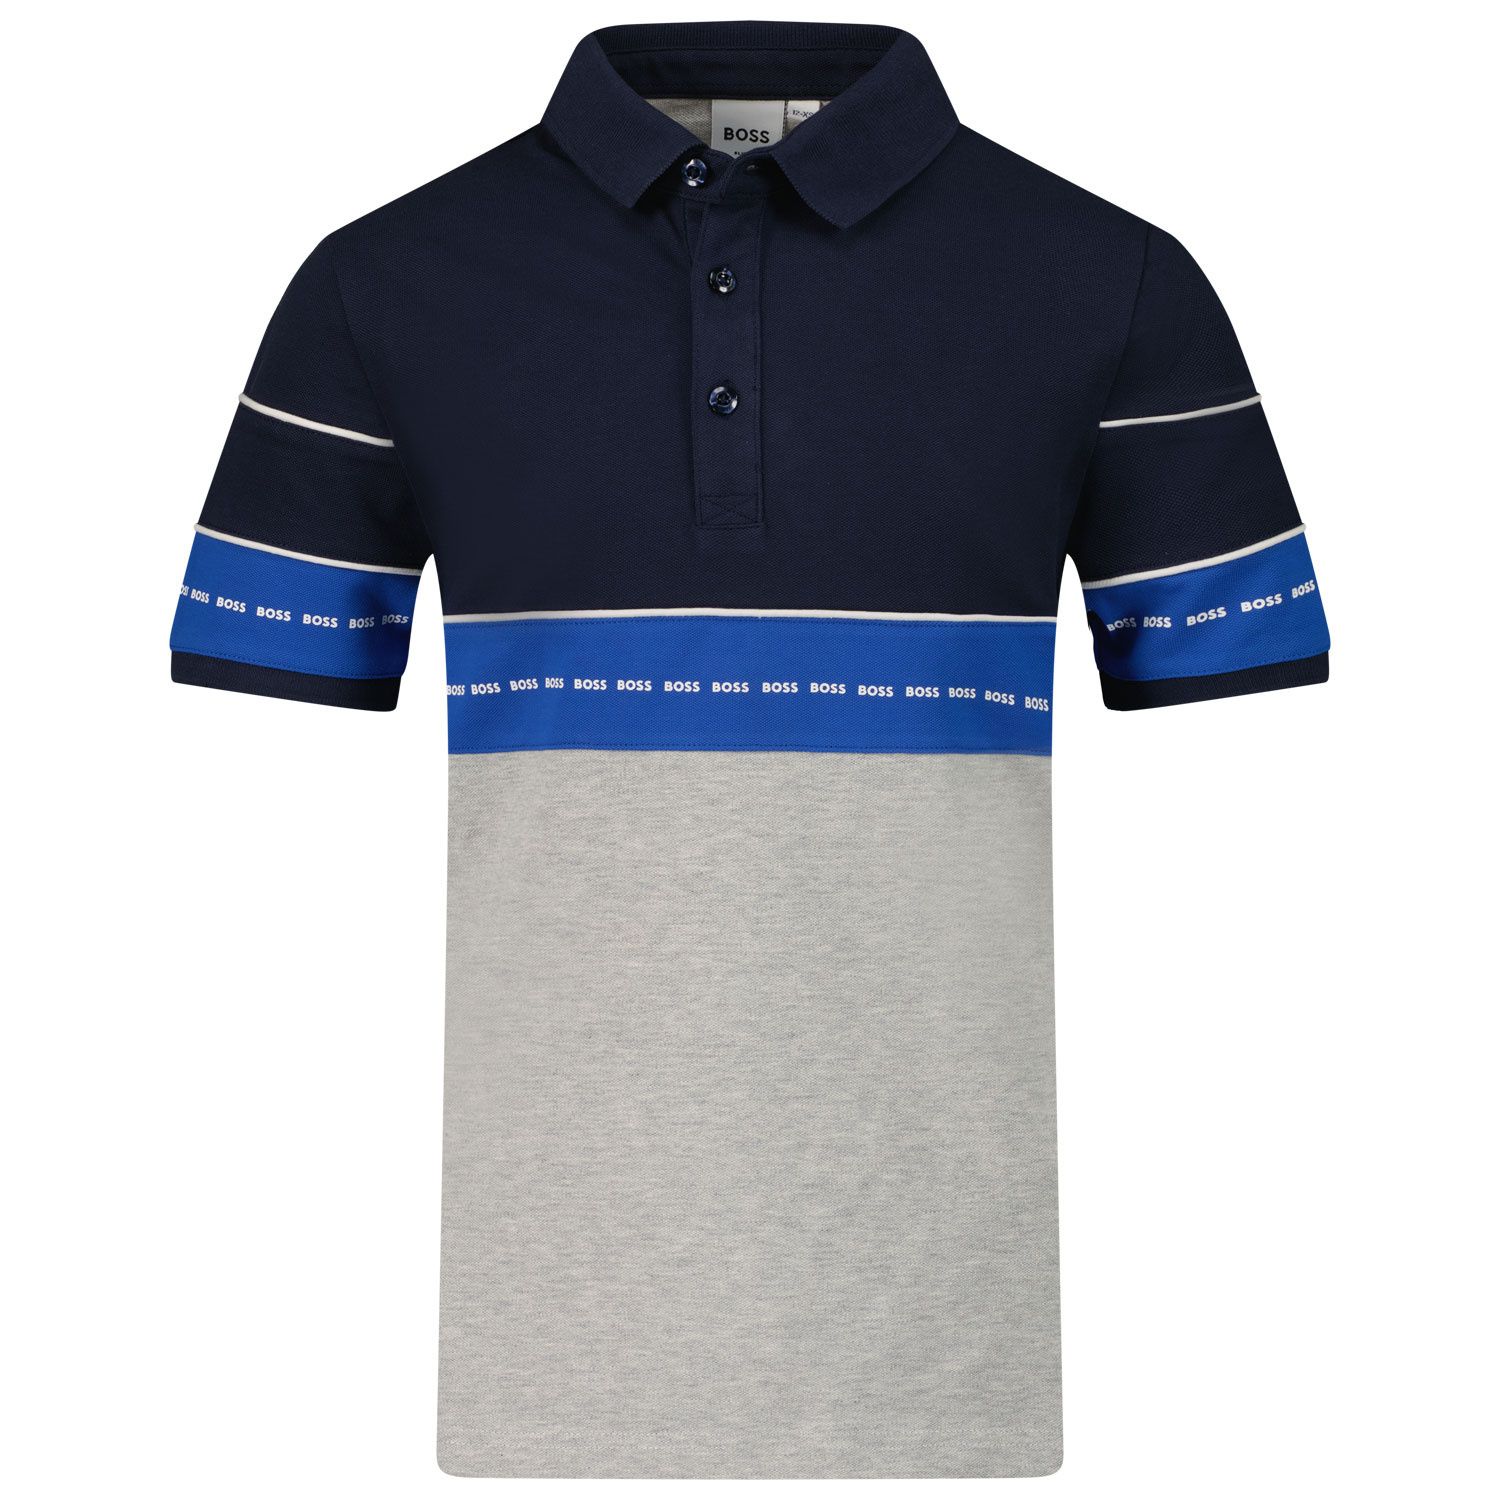 Picture of Boss J25N56 kids polo shirt navy